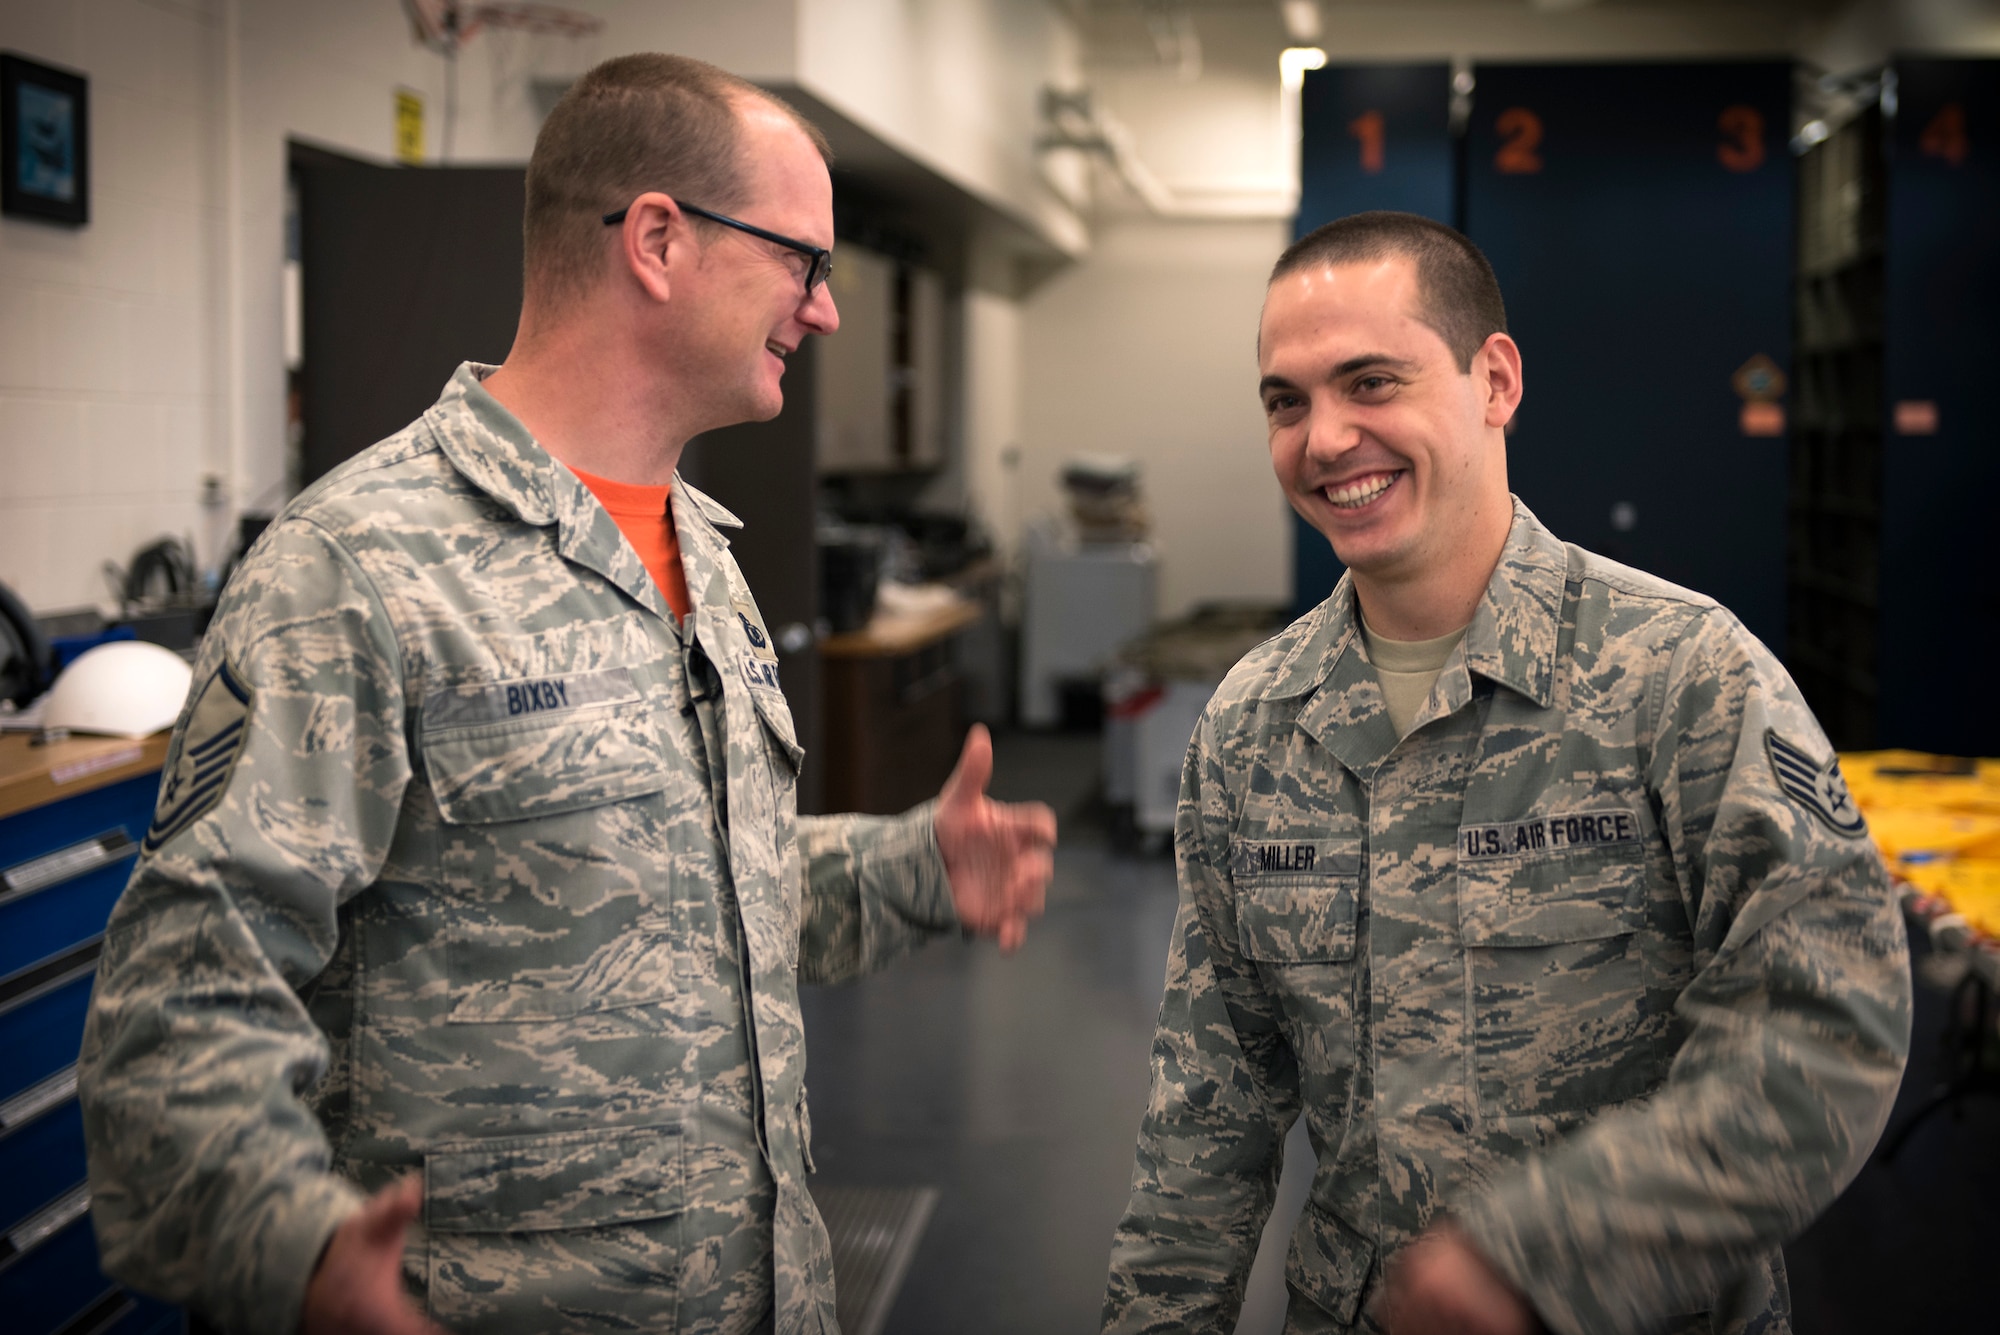 U.S. Air Force Master Sgt. Brent Bixby, left, the airfield management superintendent with the 182nd Operations Support Squadron, Illinois Air National Guard, and Staff Sgt. Ryan Miller, an aircrew flight equipment craftsman with the 182nd Operations Support Squadron, share a laugh during drill weekend in Peoria, Ill., May 6, 2017. Bixby provides Miller personal and professional guidance by serving as his mentor. (U.S. Air National Guard photo by Tech. Sgt. Lealan Buehrer)